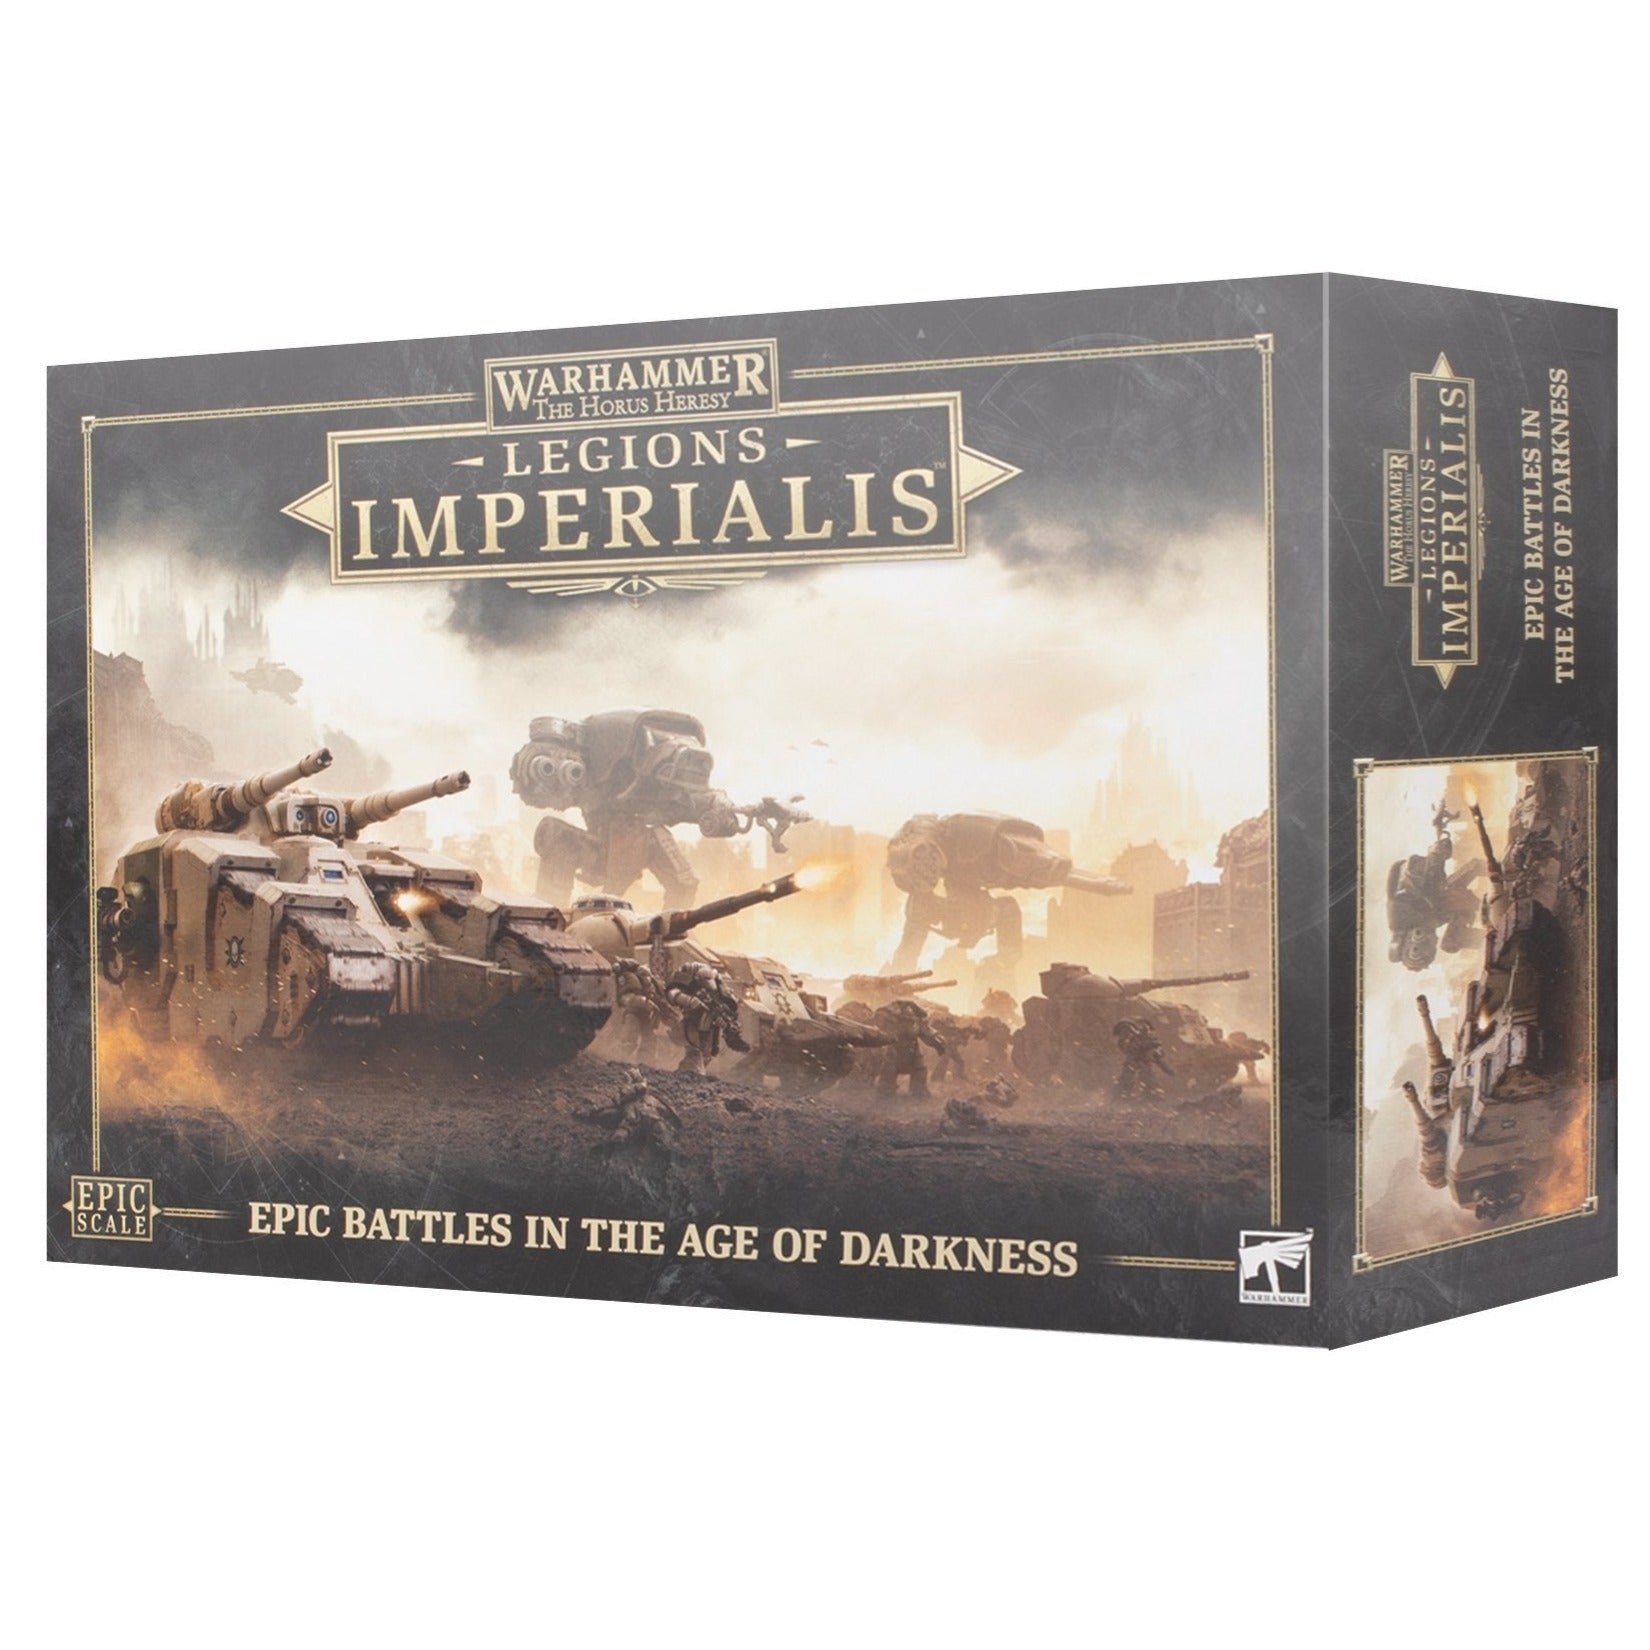 Legions Imperialis: The Horus Heresy - Release Date 2/12/23 - Loaded Dice Barry Vale of Glamorgan CF64 3HD